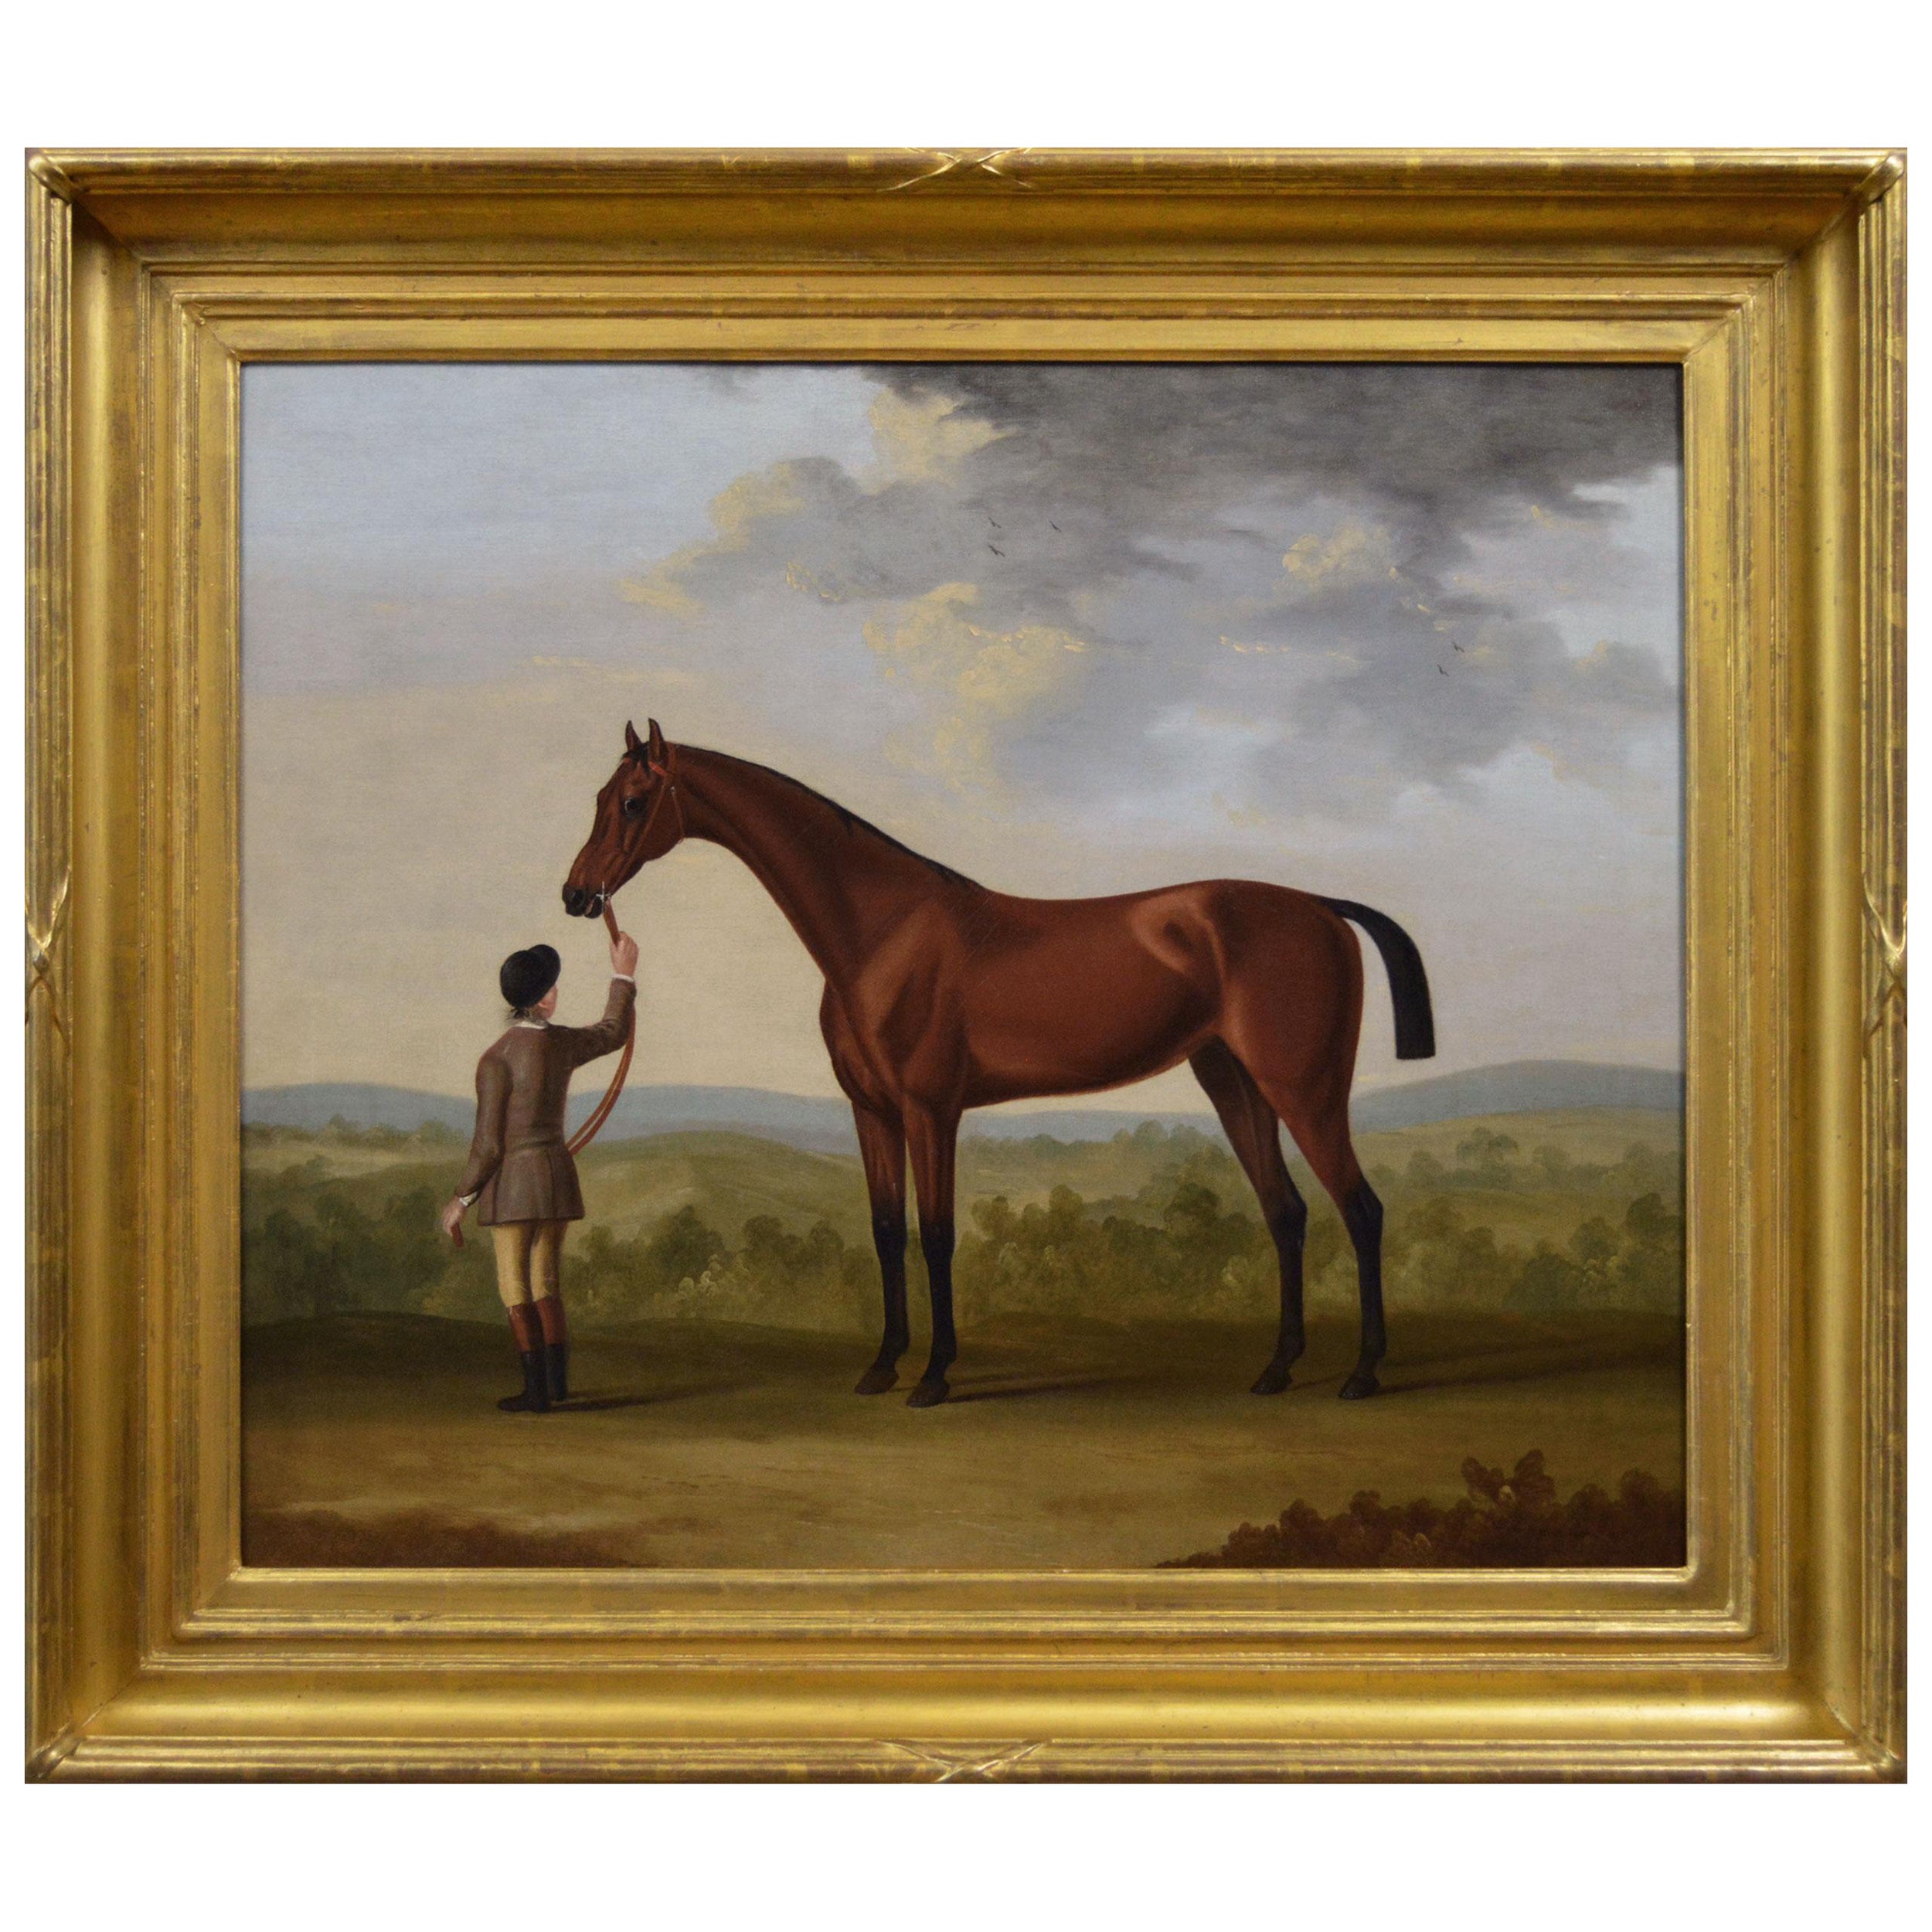 18th Century sporting horse portrait oil painting of a race horse and groom 